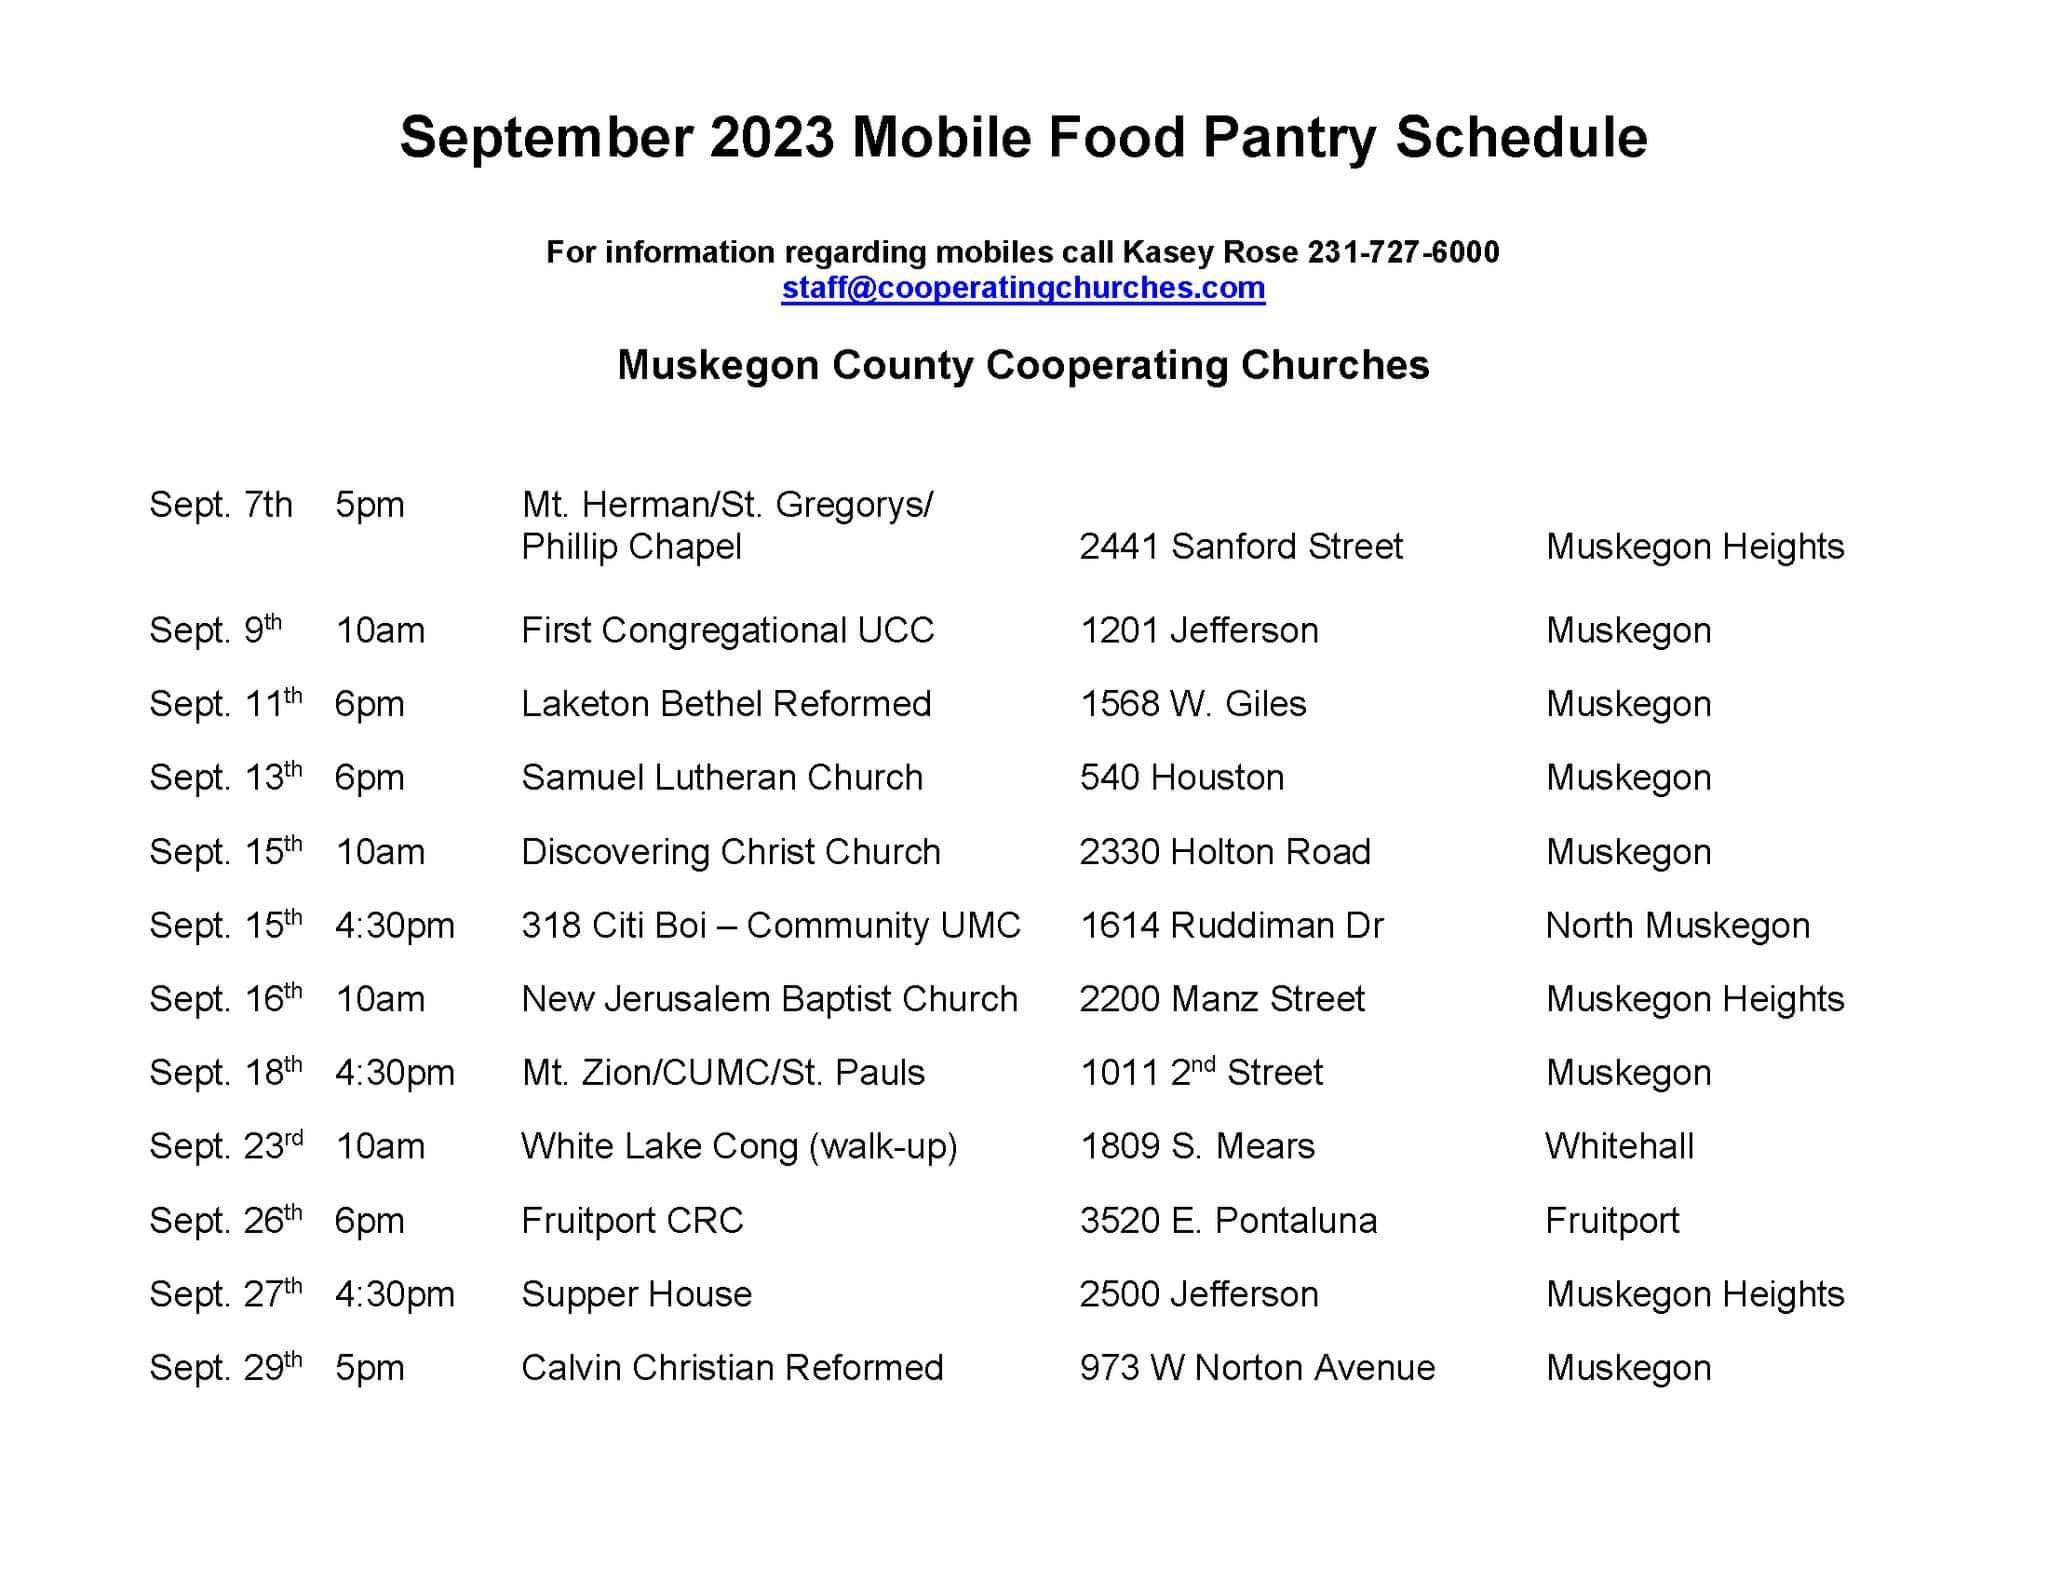 September 2023 Mobile Food Pantry Schedule.  Please call 231-719-4200 if you need the schedule read to you.